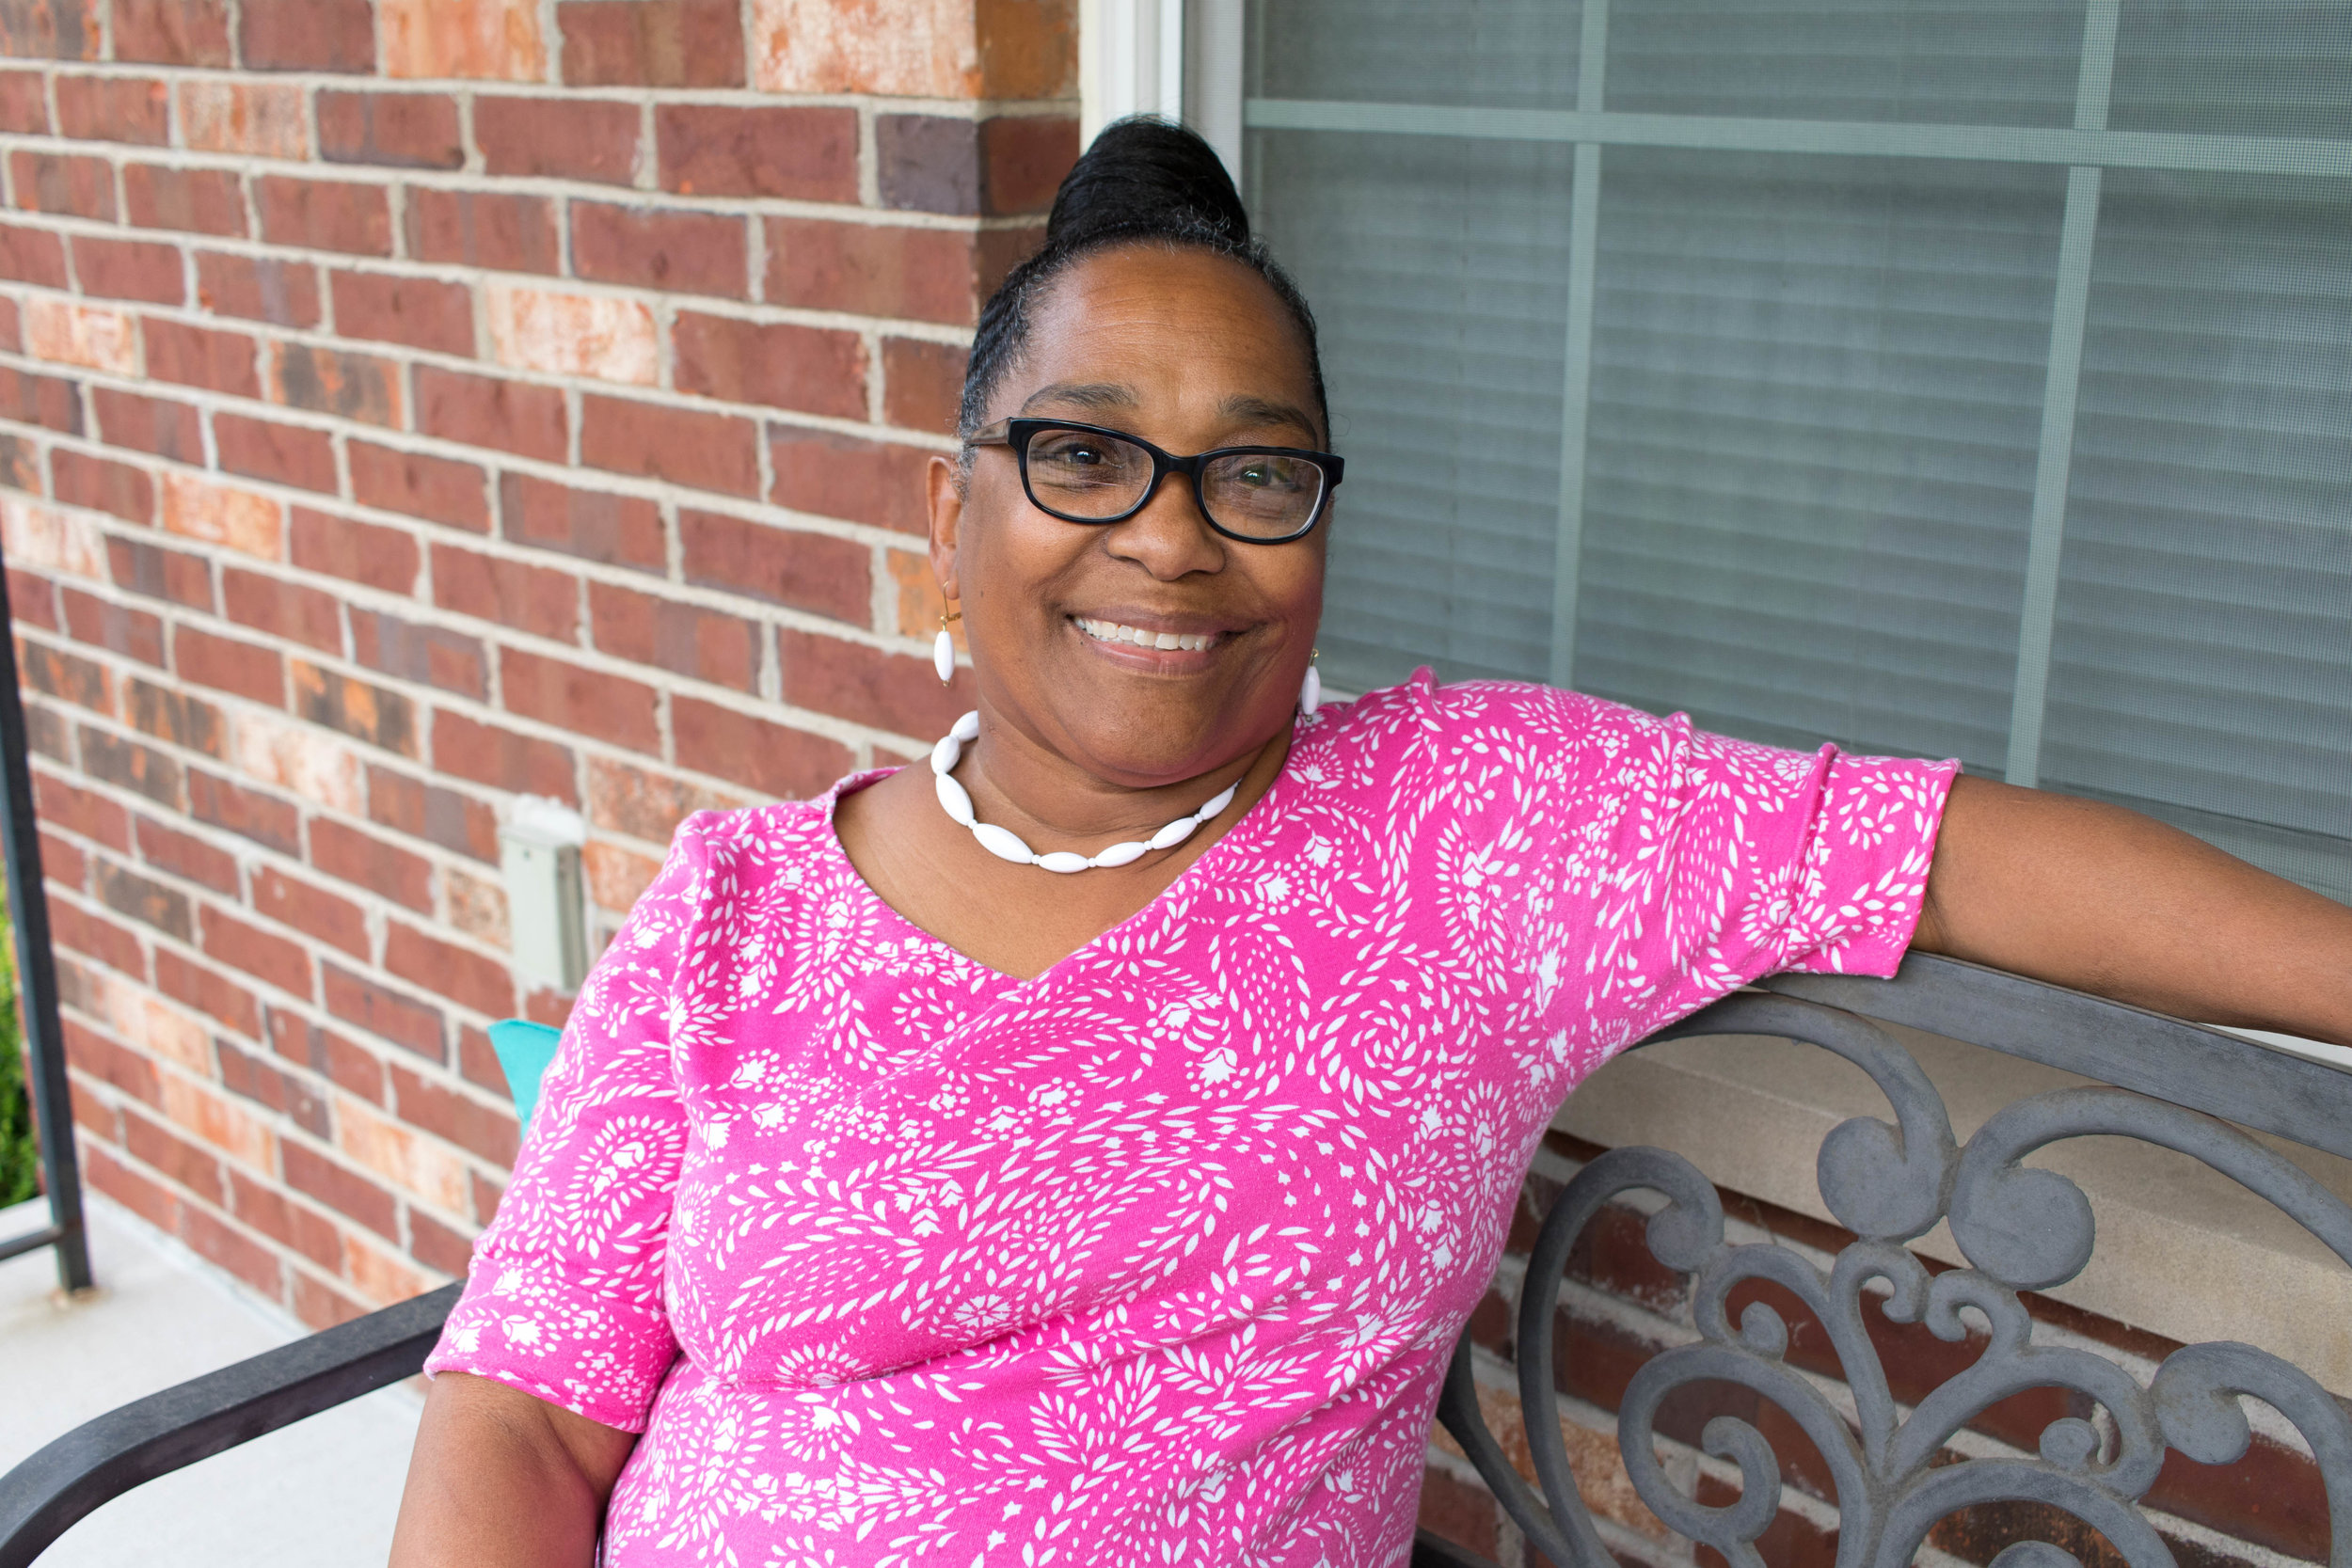  Janet Roberson is a board member of Northside Community Housing and a recent graduate of WEPOWER’s Power-Building Academy. She is pictured here on her front porch in The Ville neighborhood. Photo by Kristen Trudo. 